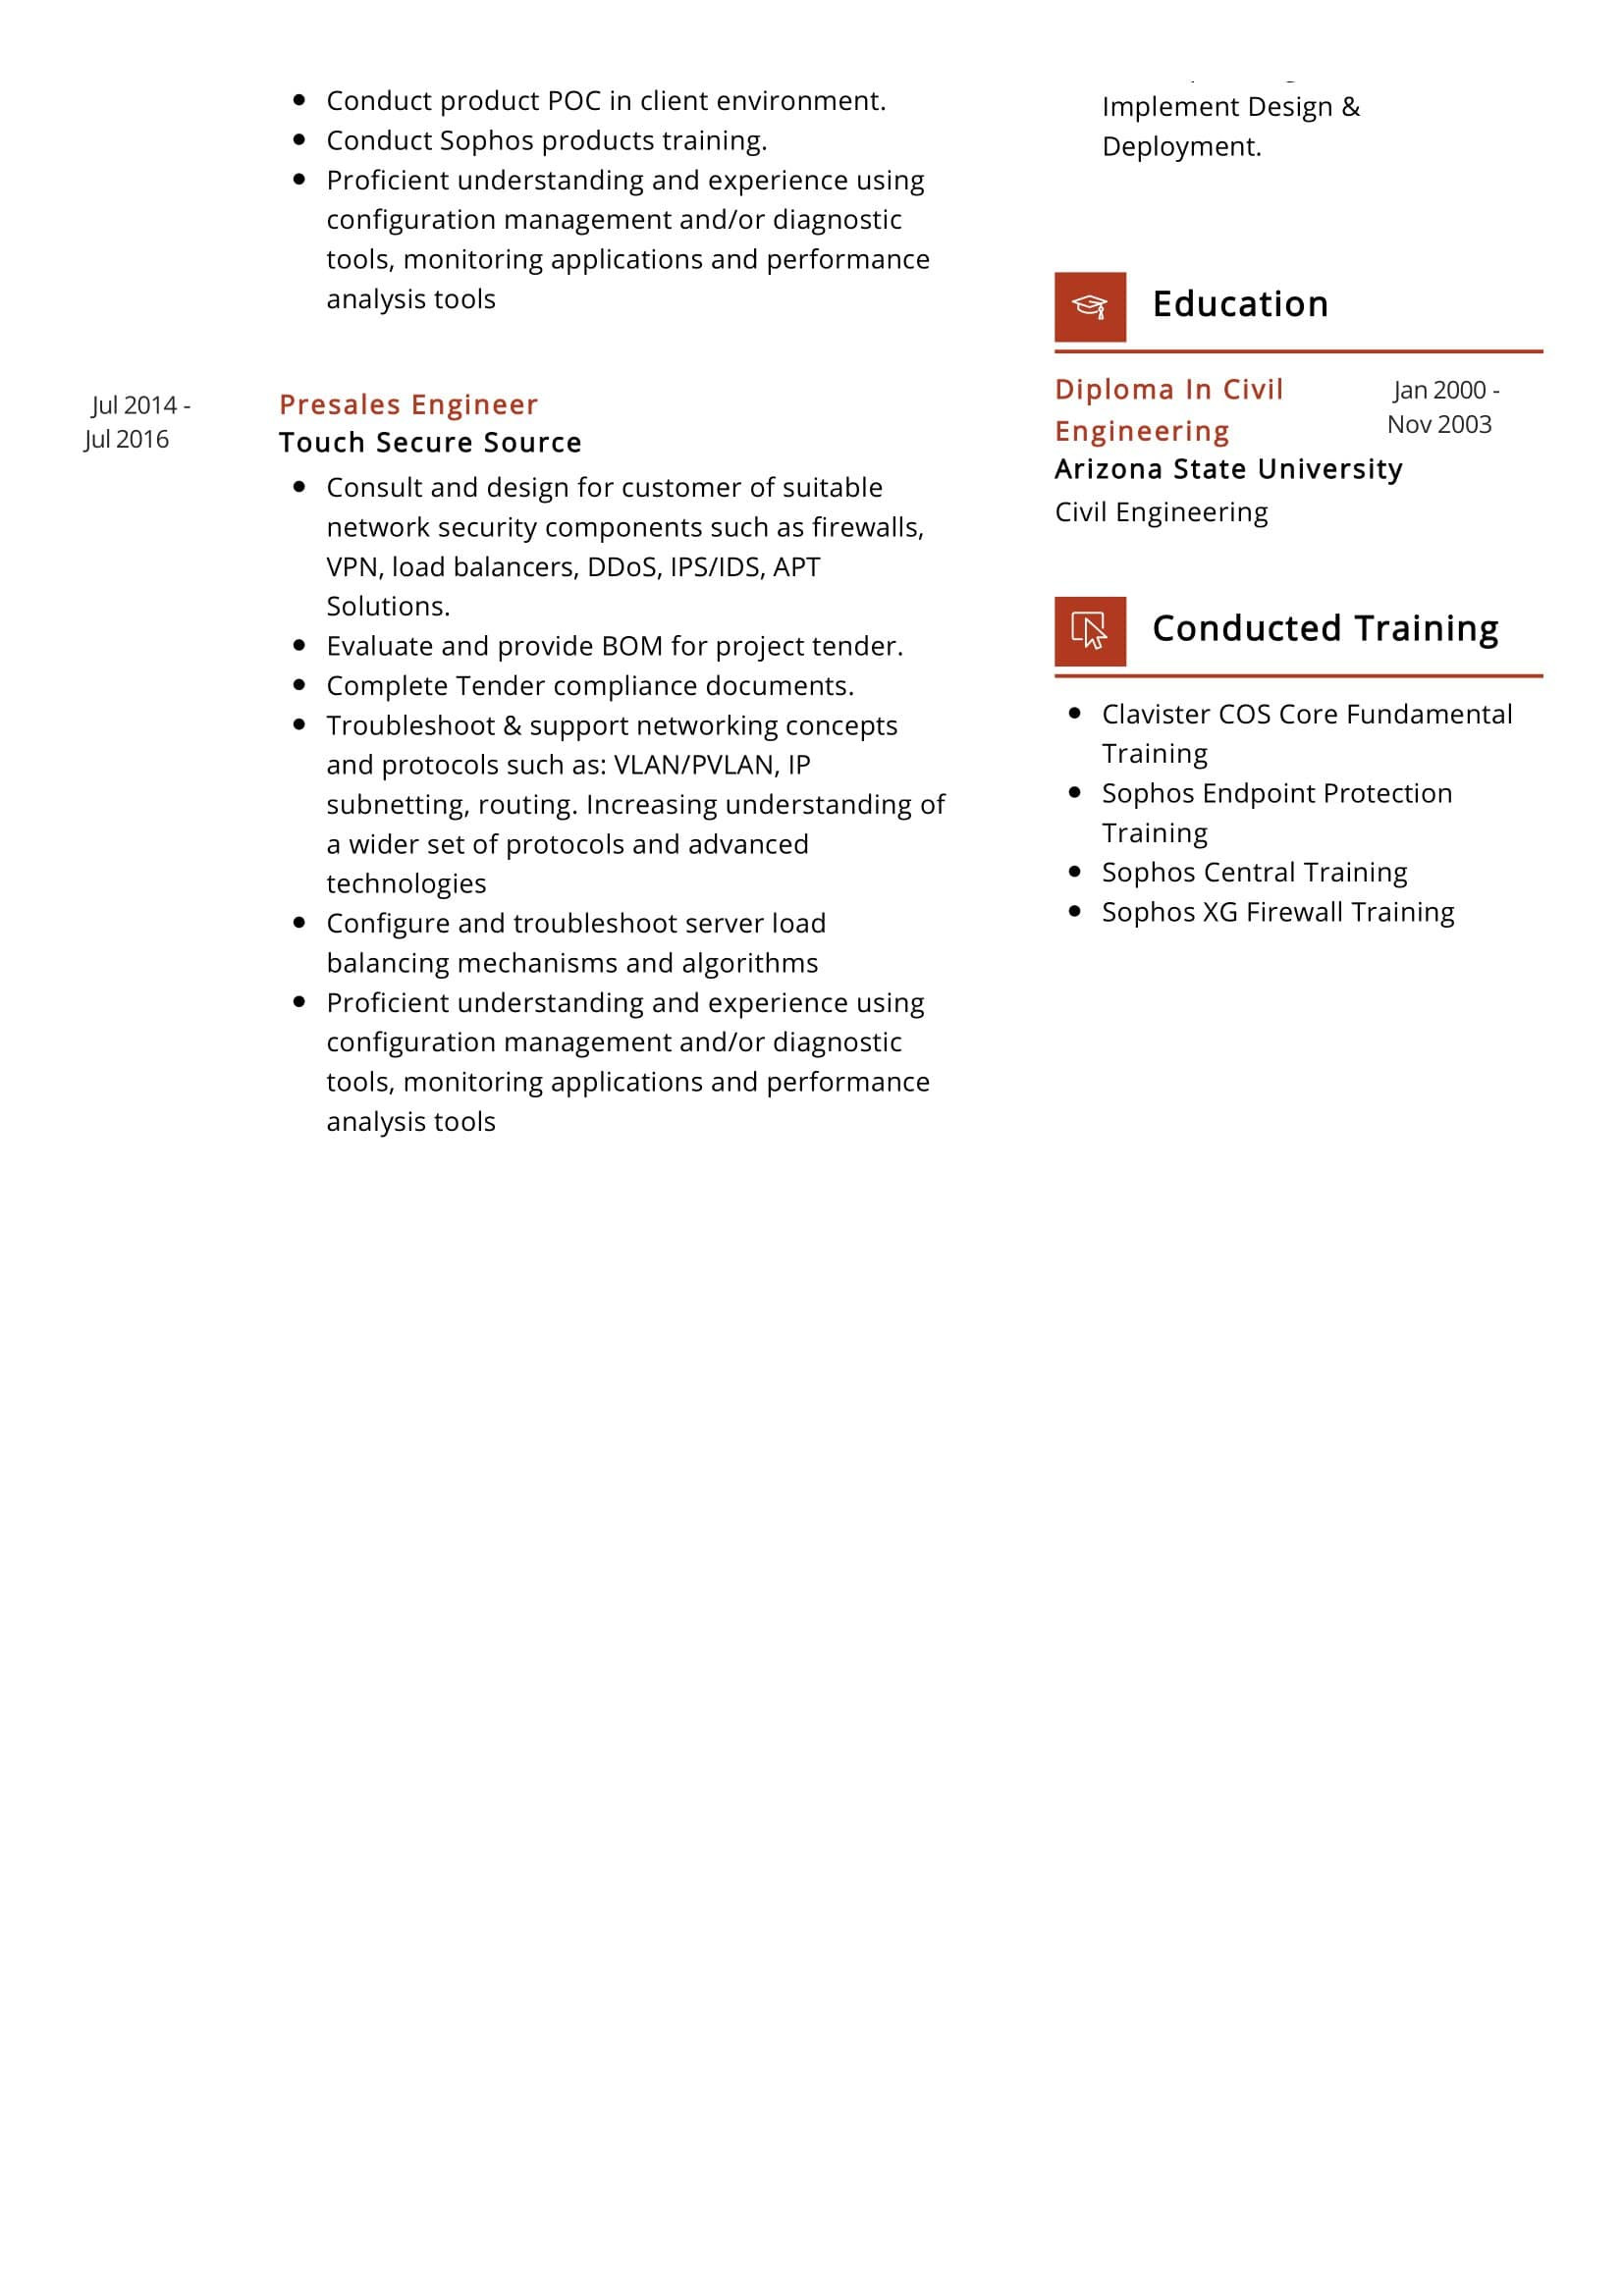 Creating A Cyber Security Resume Sample Cyber Security Engineer Resume Sample 2022 Writing Tips …